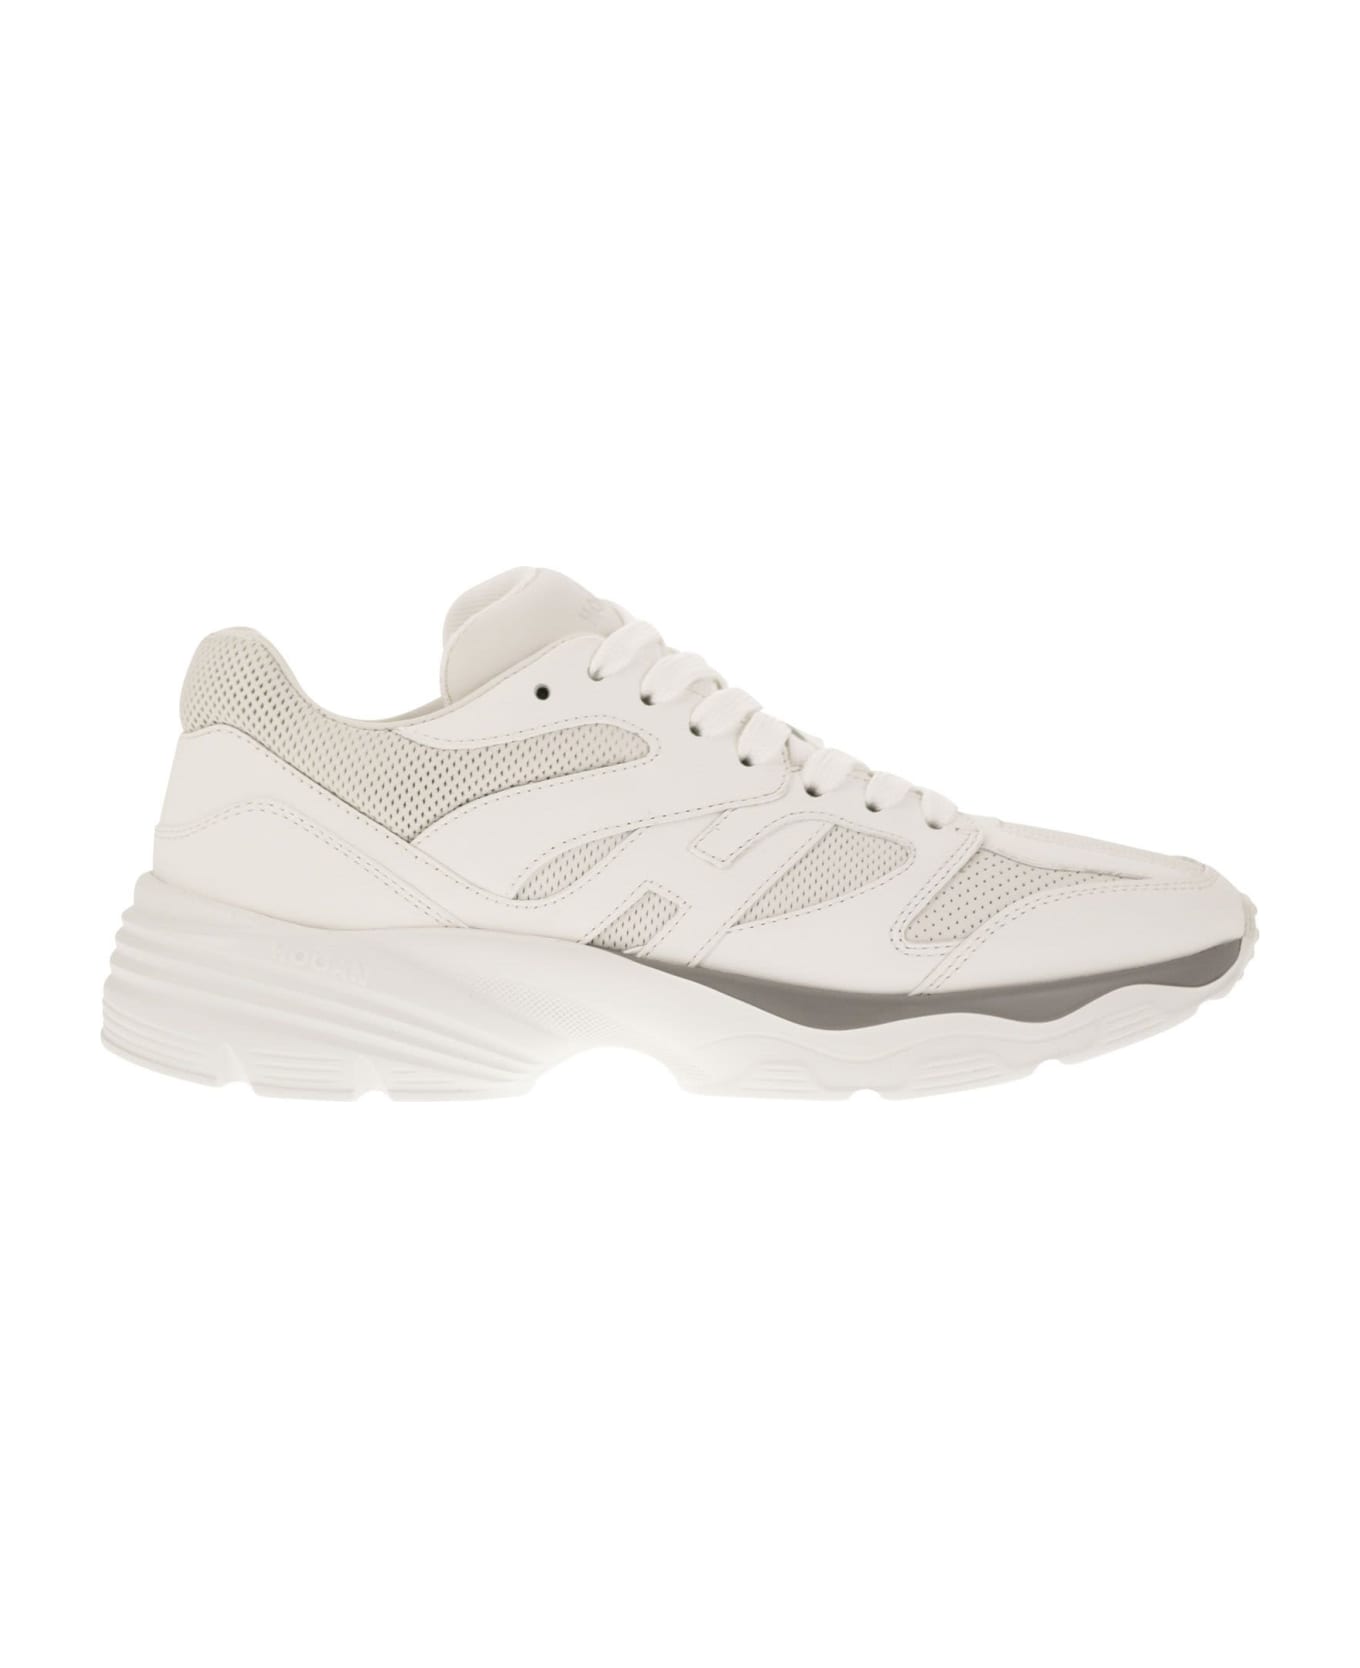 Hogan Round Toe Lace-up Sneakers - White